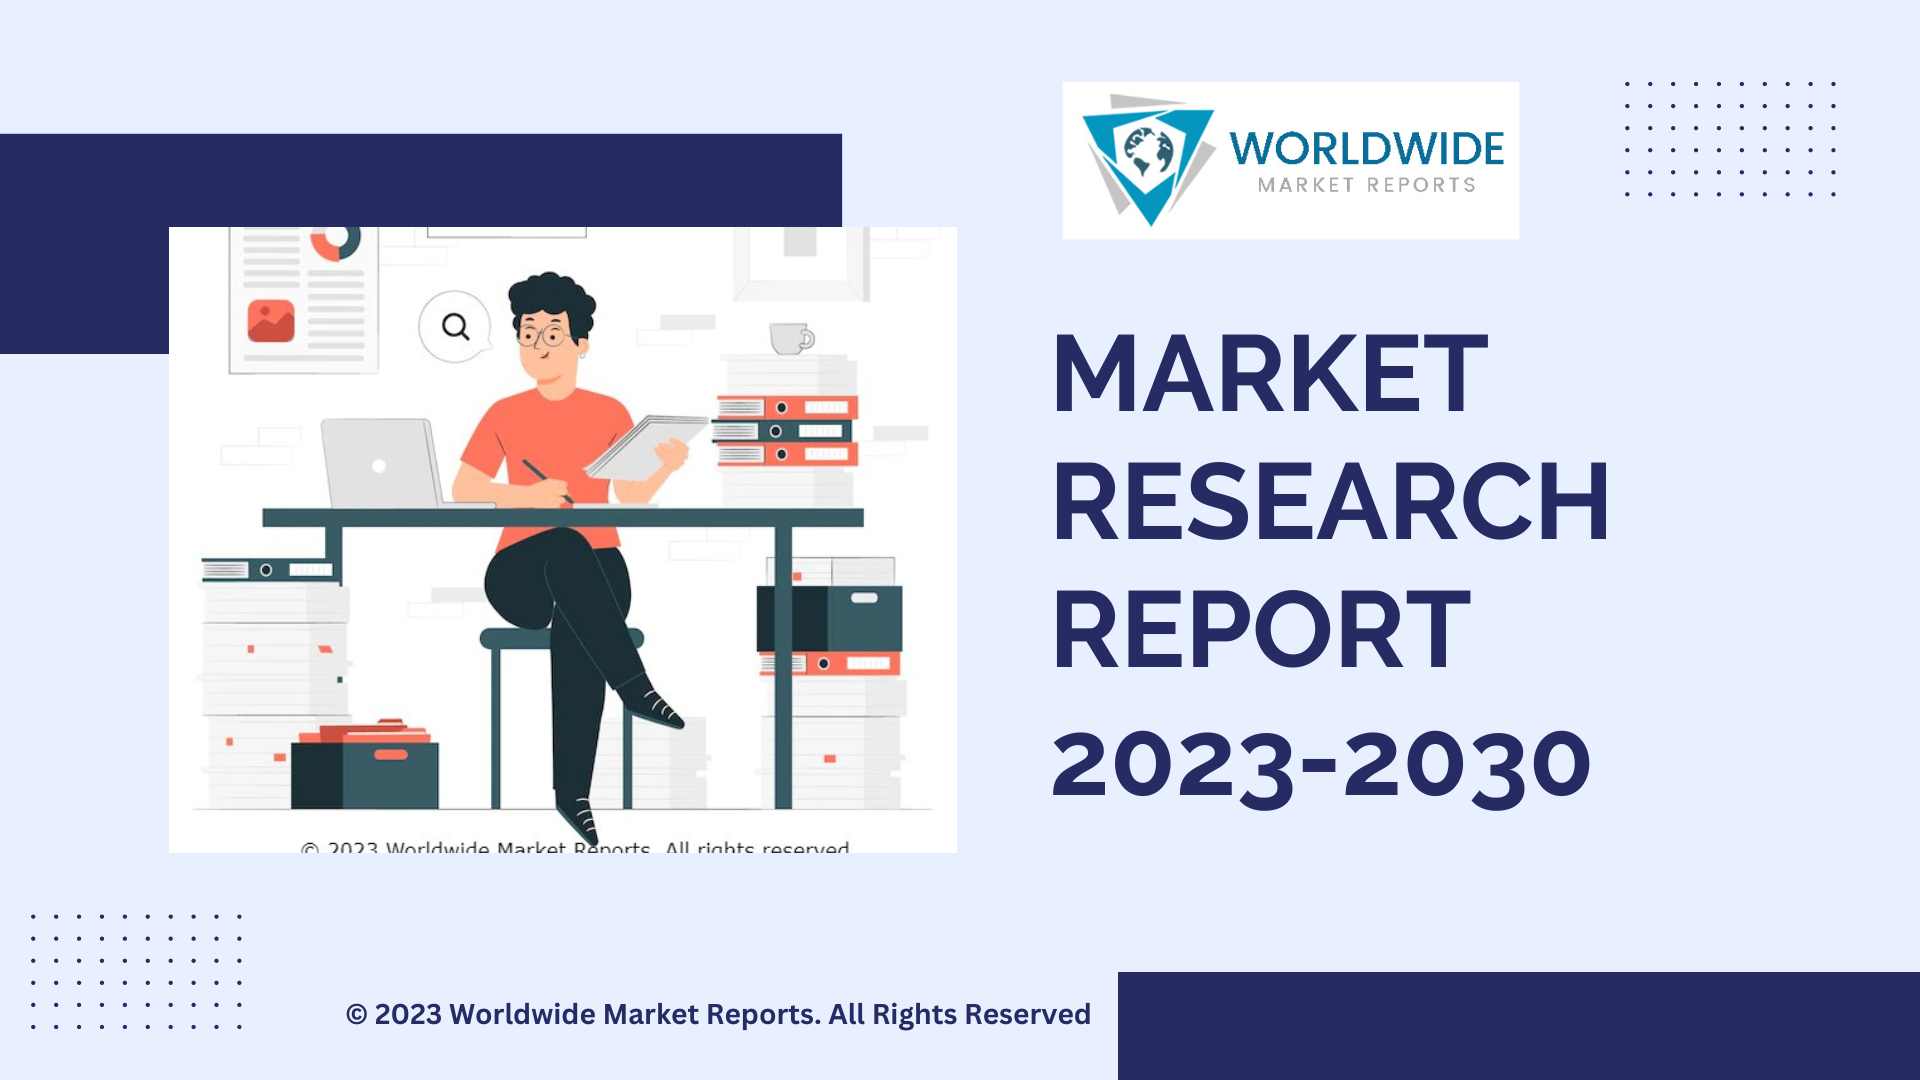 Metabolomics Market 2023 with Growth Overview, Developments in Manufacturing Technology, Segmentation, Competitive Landscape and Forecast to 2030